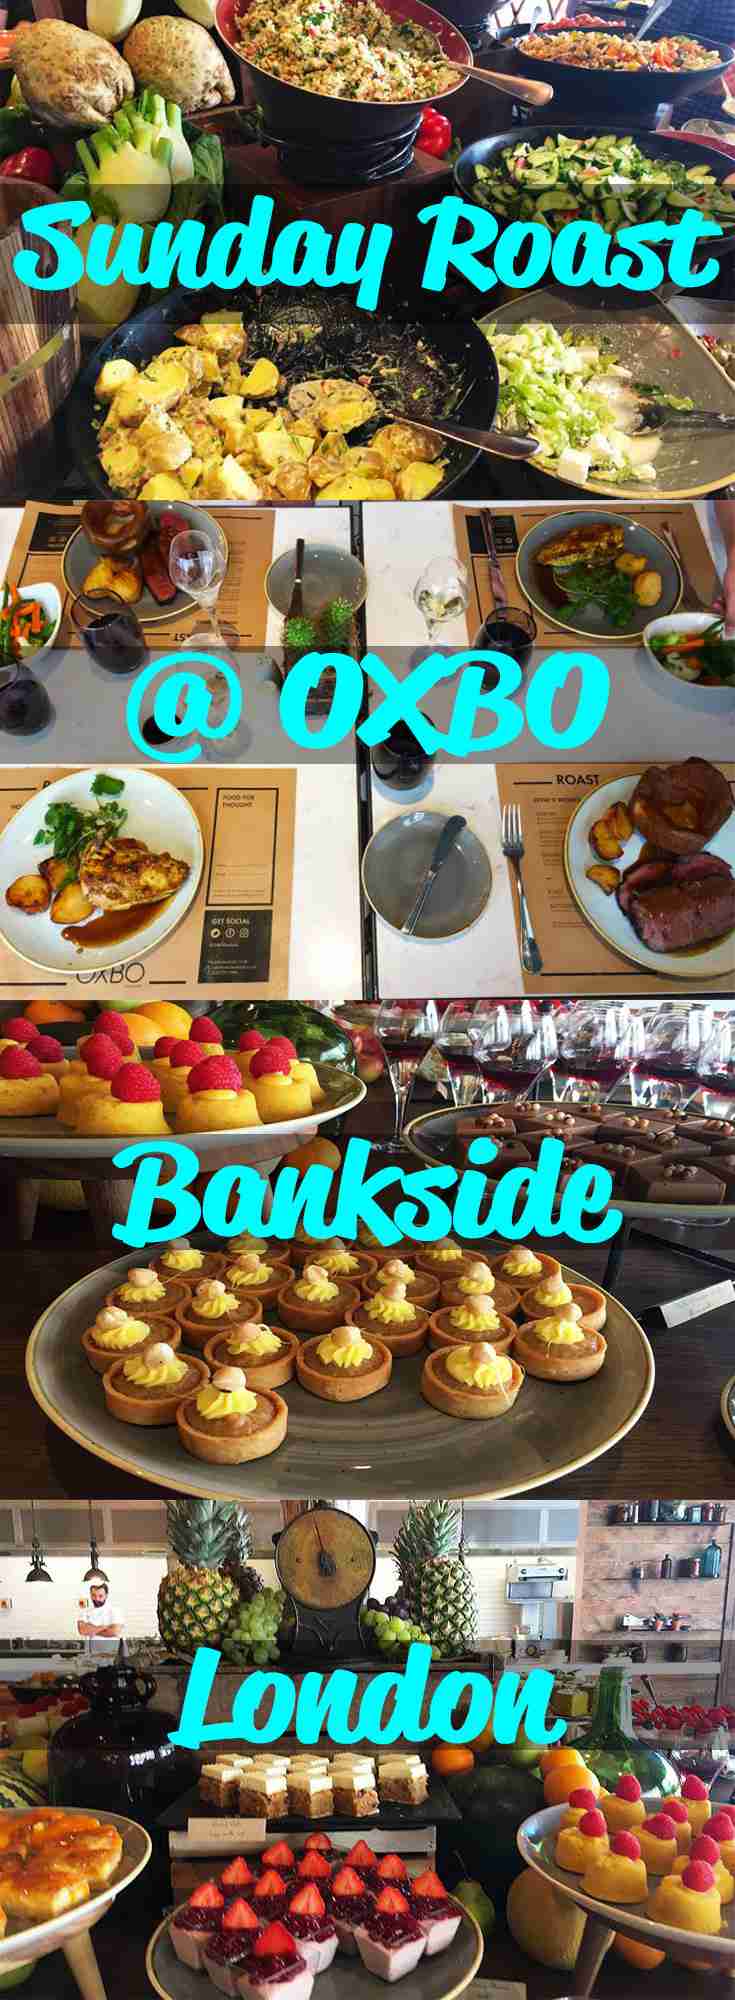 A Sunday Roast Feast @ Oxbo Bankside, London – WhodoIdo: A delicious bottomless Sunday Roast in London with unlimited bubbles. What's not to love!